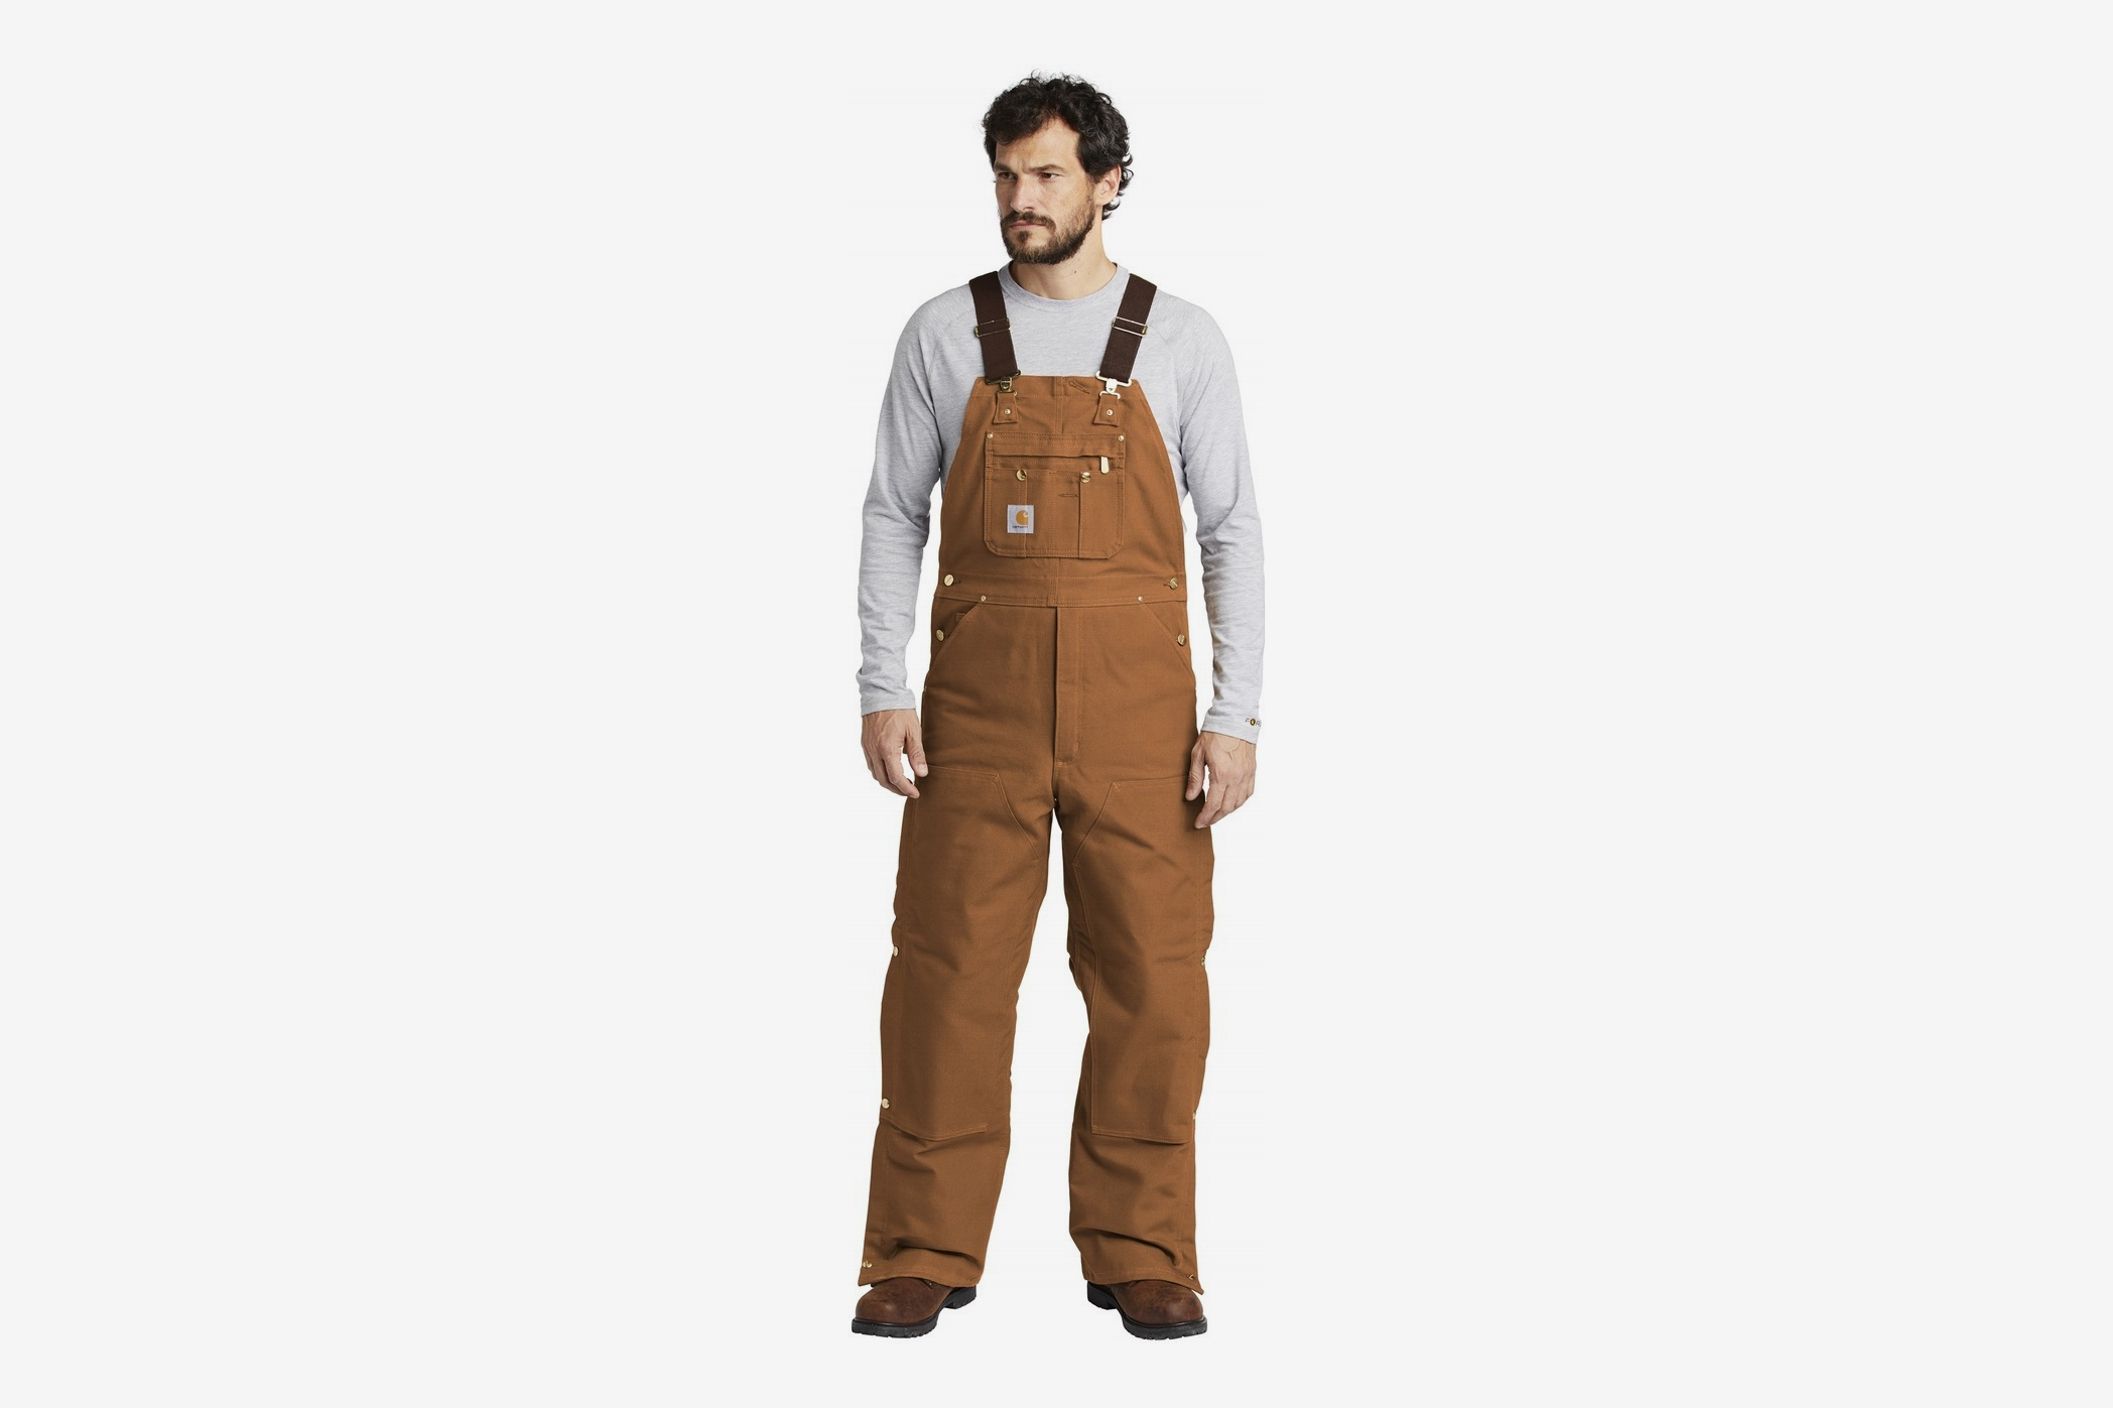 How to Shop for Carhartt Overalls 2020